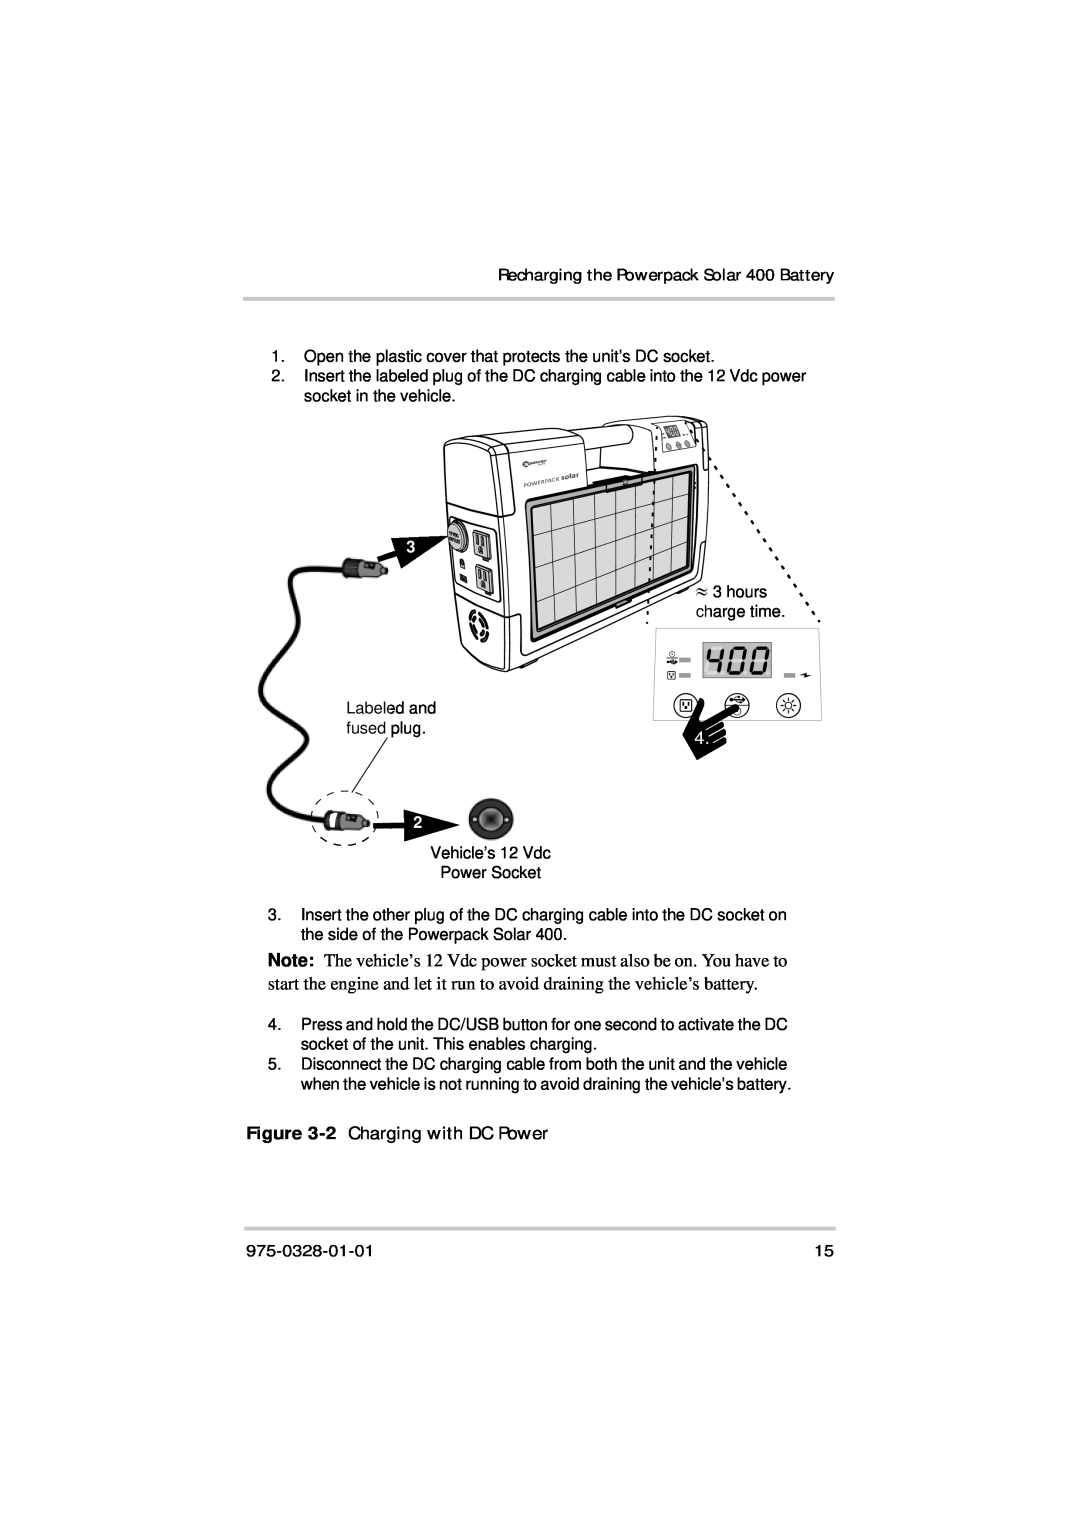 Xantrex Technology manual 2 Charging with DC Power, Recharging the Powerpack Solar 400 Battery, 975-0328-01-01 